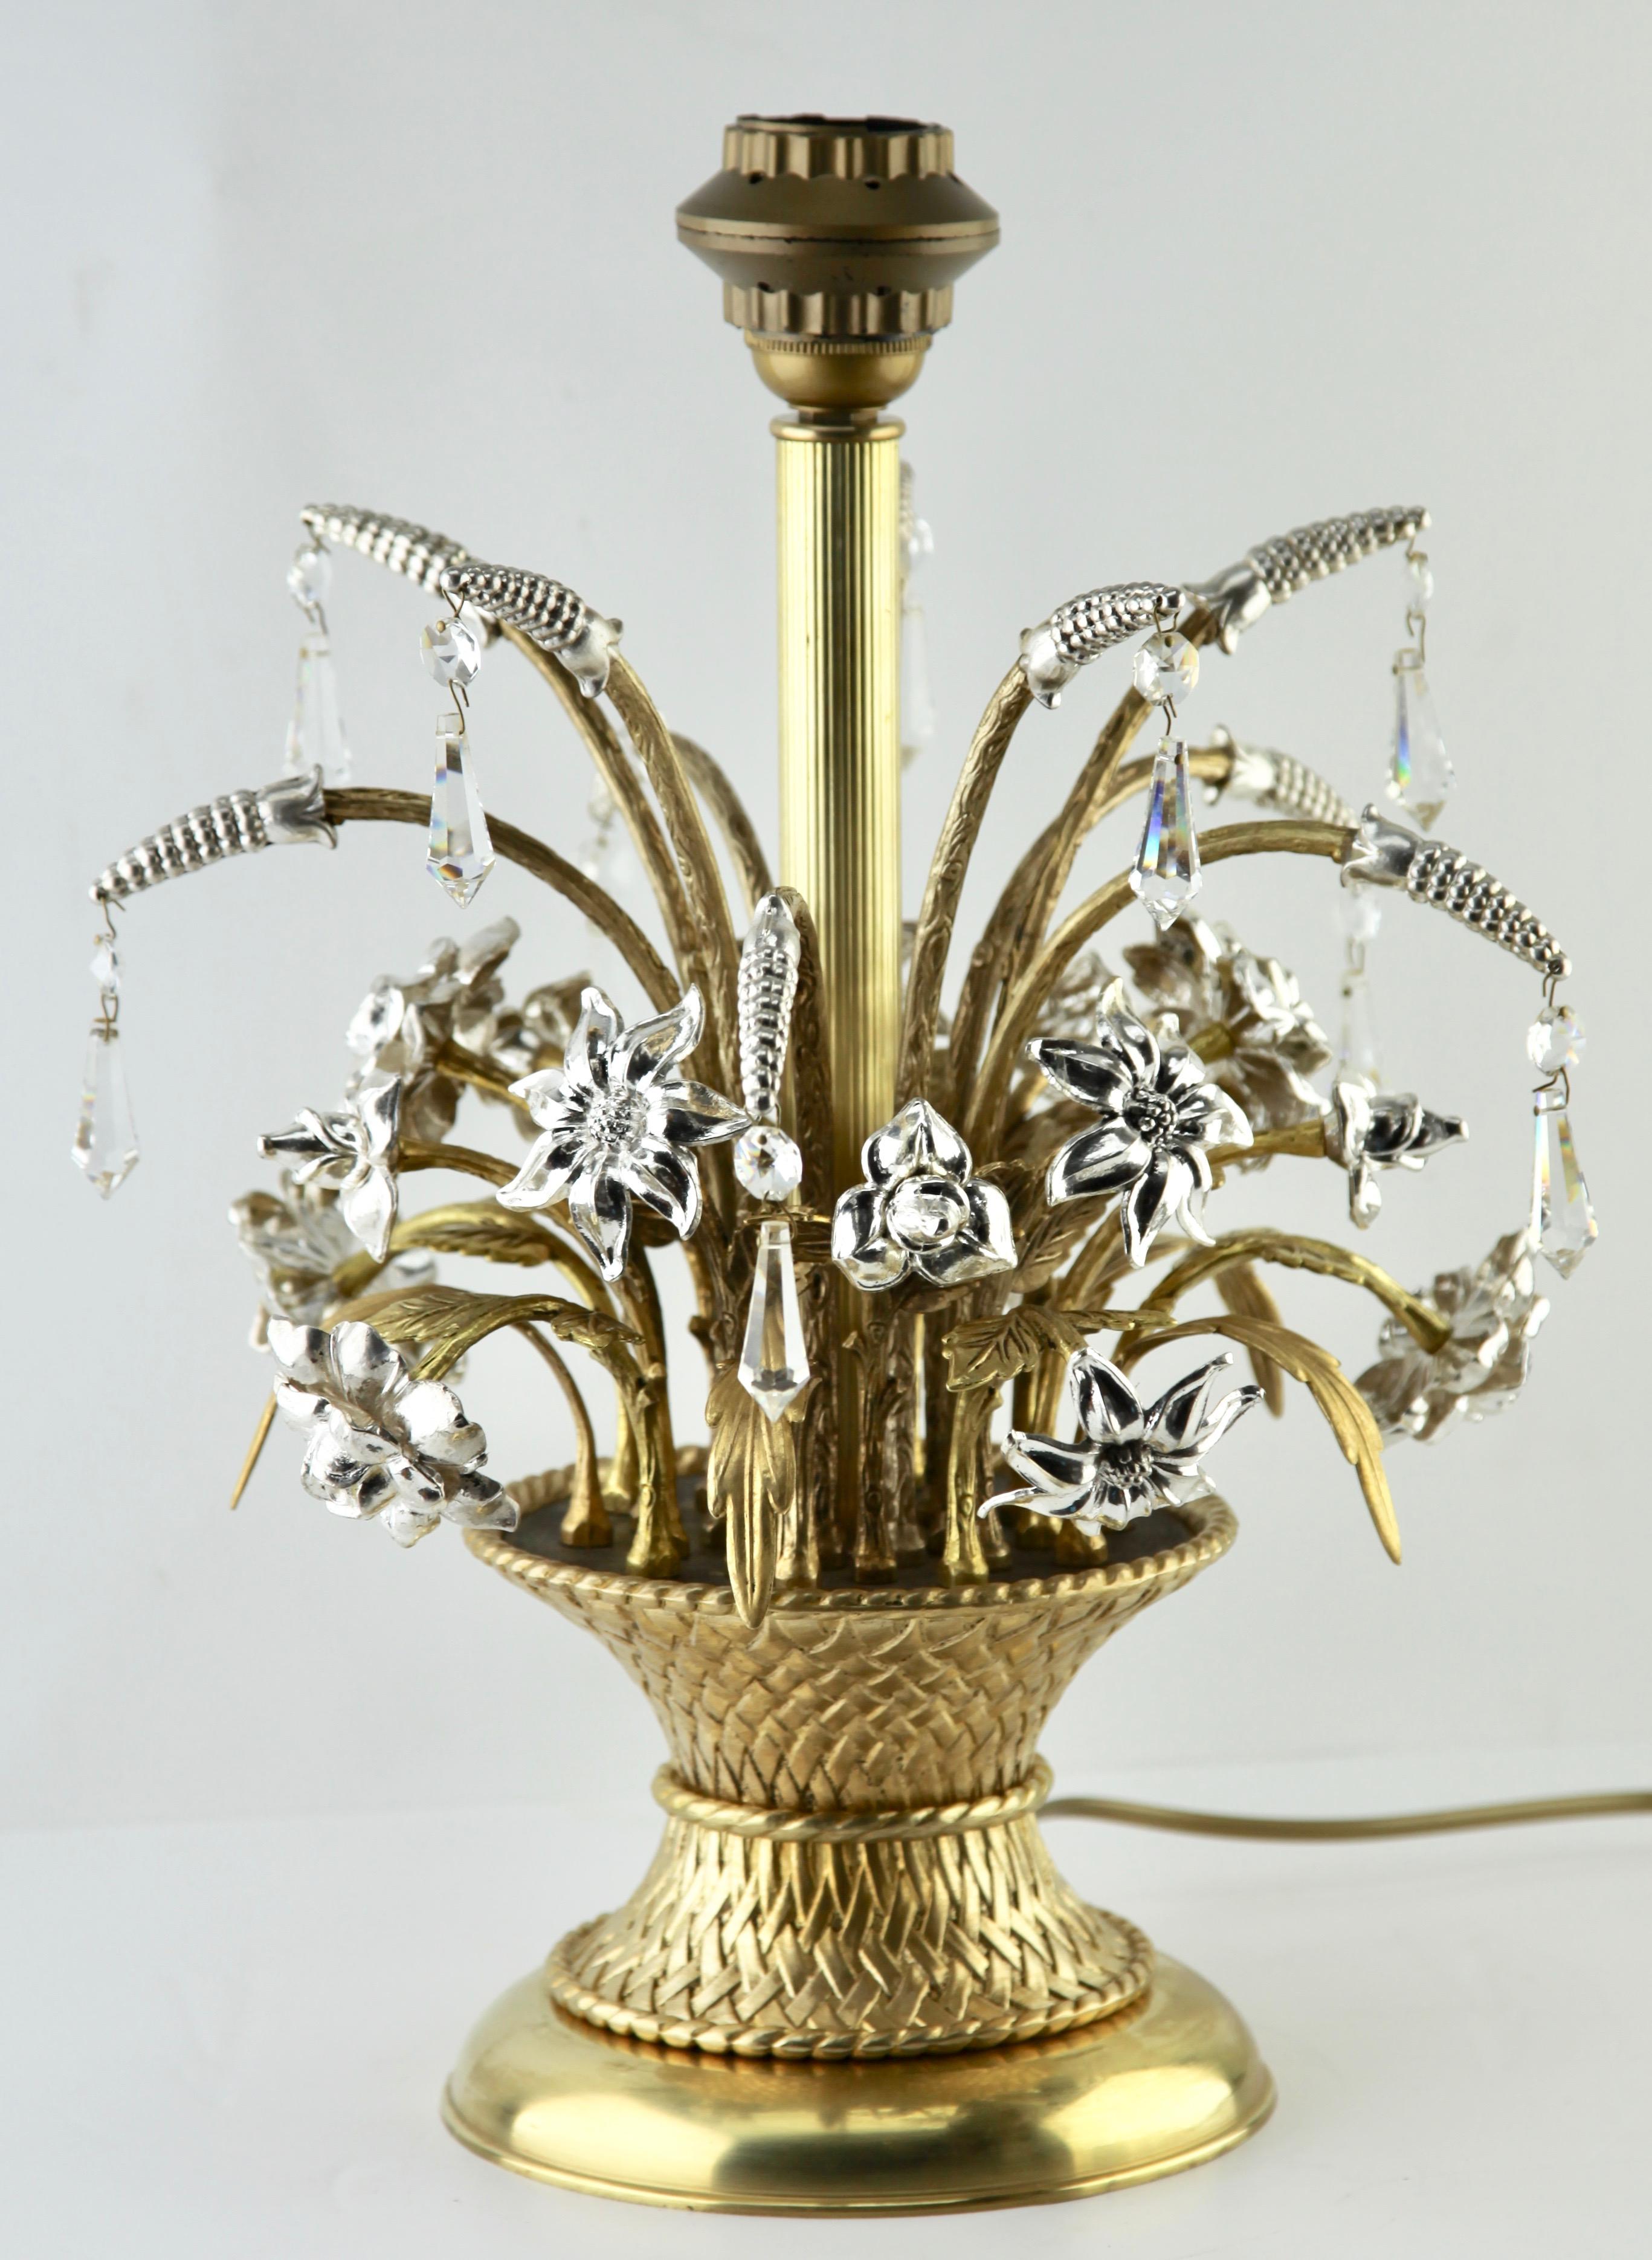 Lamp Representing a Bouquet of Brass and Silver Metal Flowers in a Basket, 1960s For Sale 5